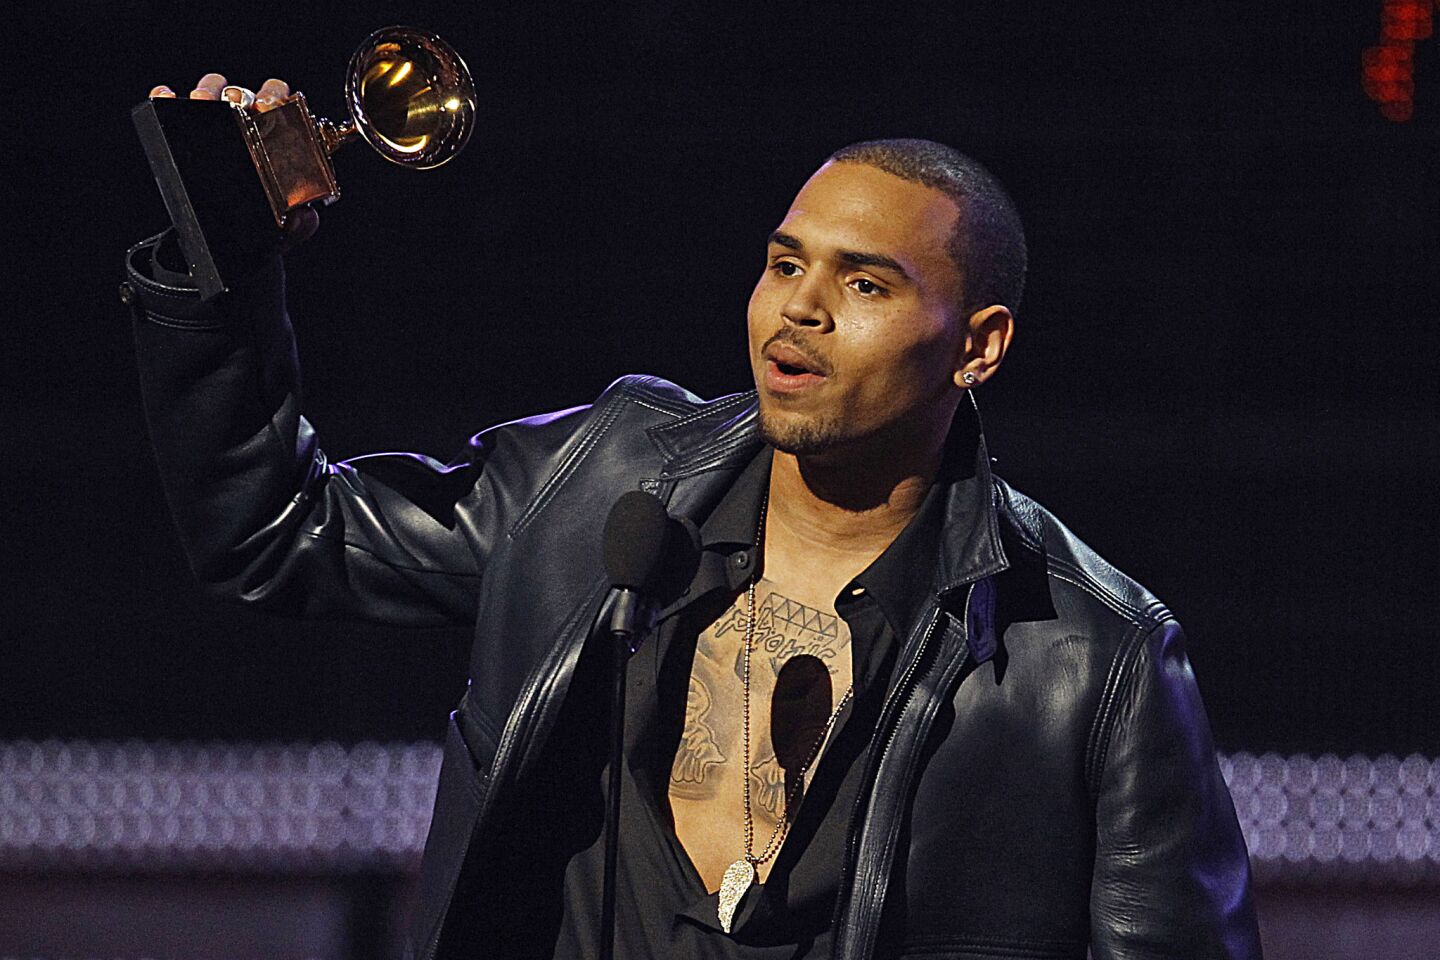 Three years after he was arrested for assaulting his girlfriend Rihanna after a pre-Grammys party, Chris Brown received his first Grammy award when his album "F.A.M.E." won best R&B album. Brown said nothing about his past deeds as he accepted the award on the telecast.